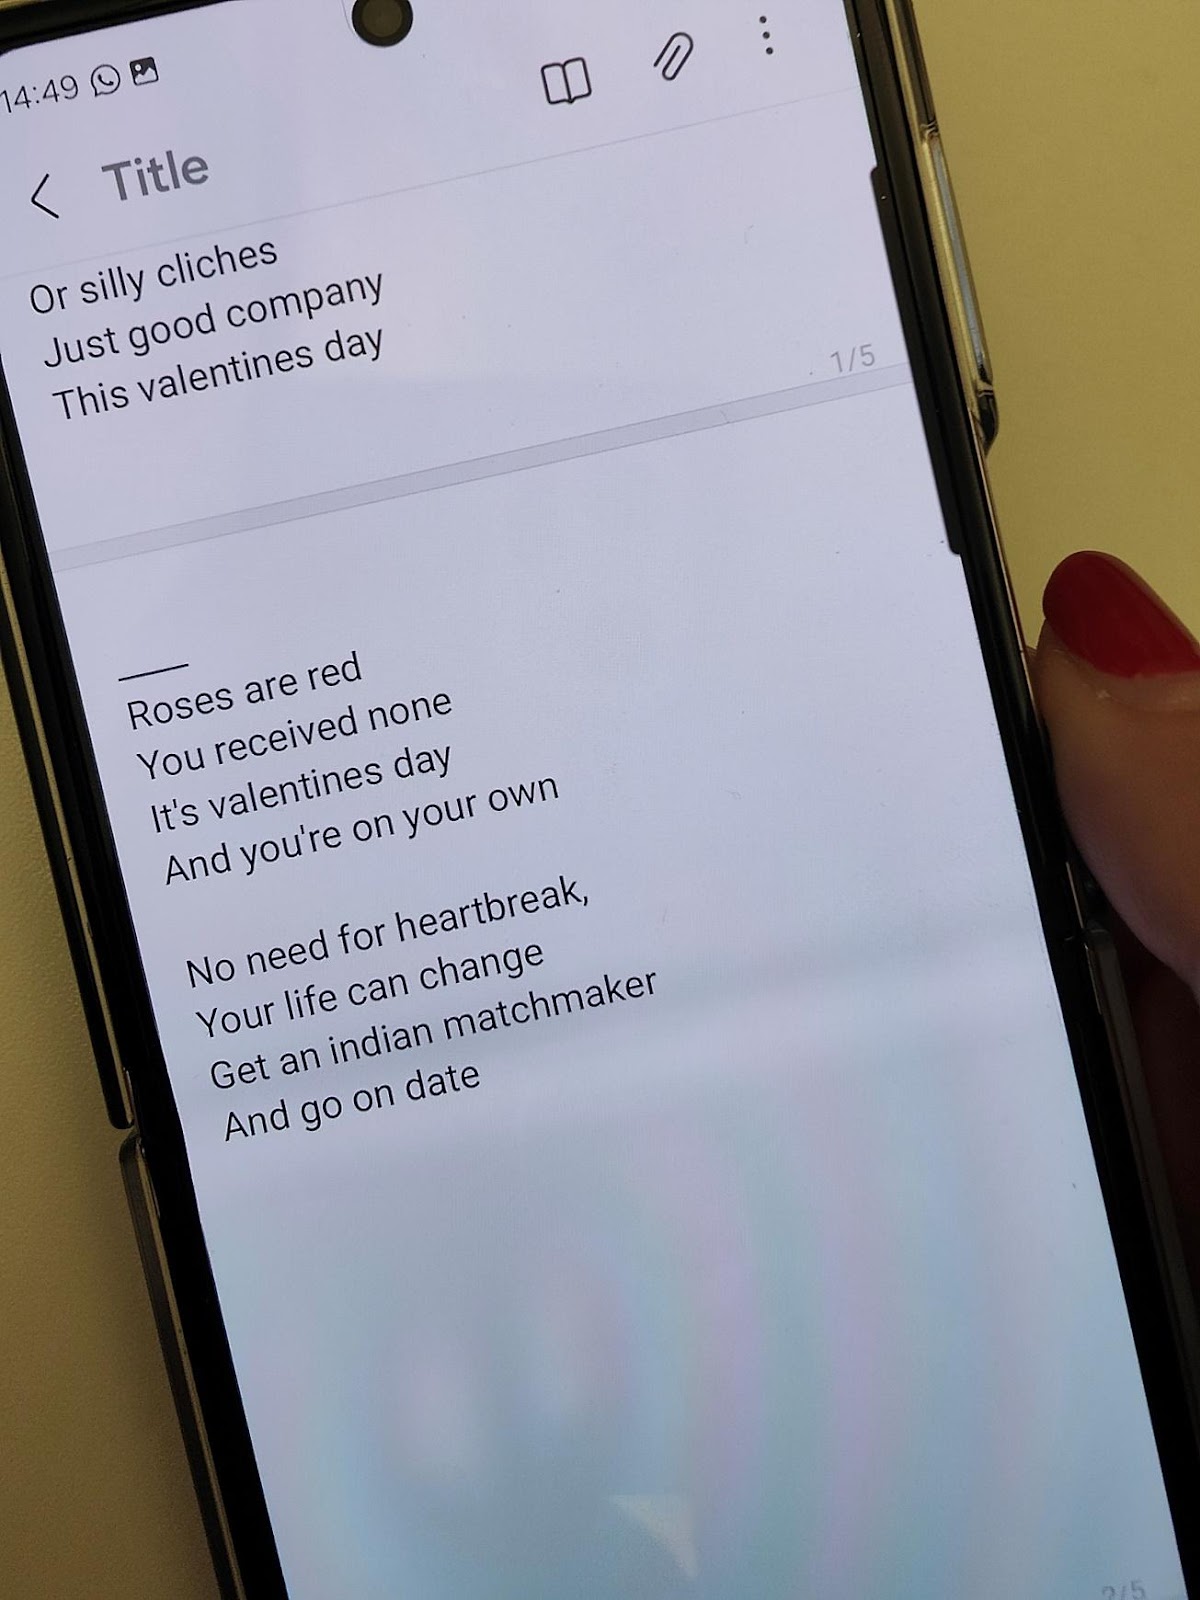 A hand holding a phone with text on it

Description automatically generated